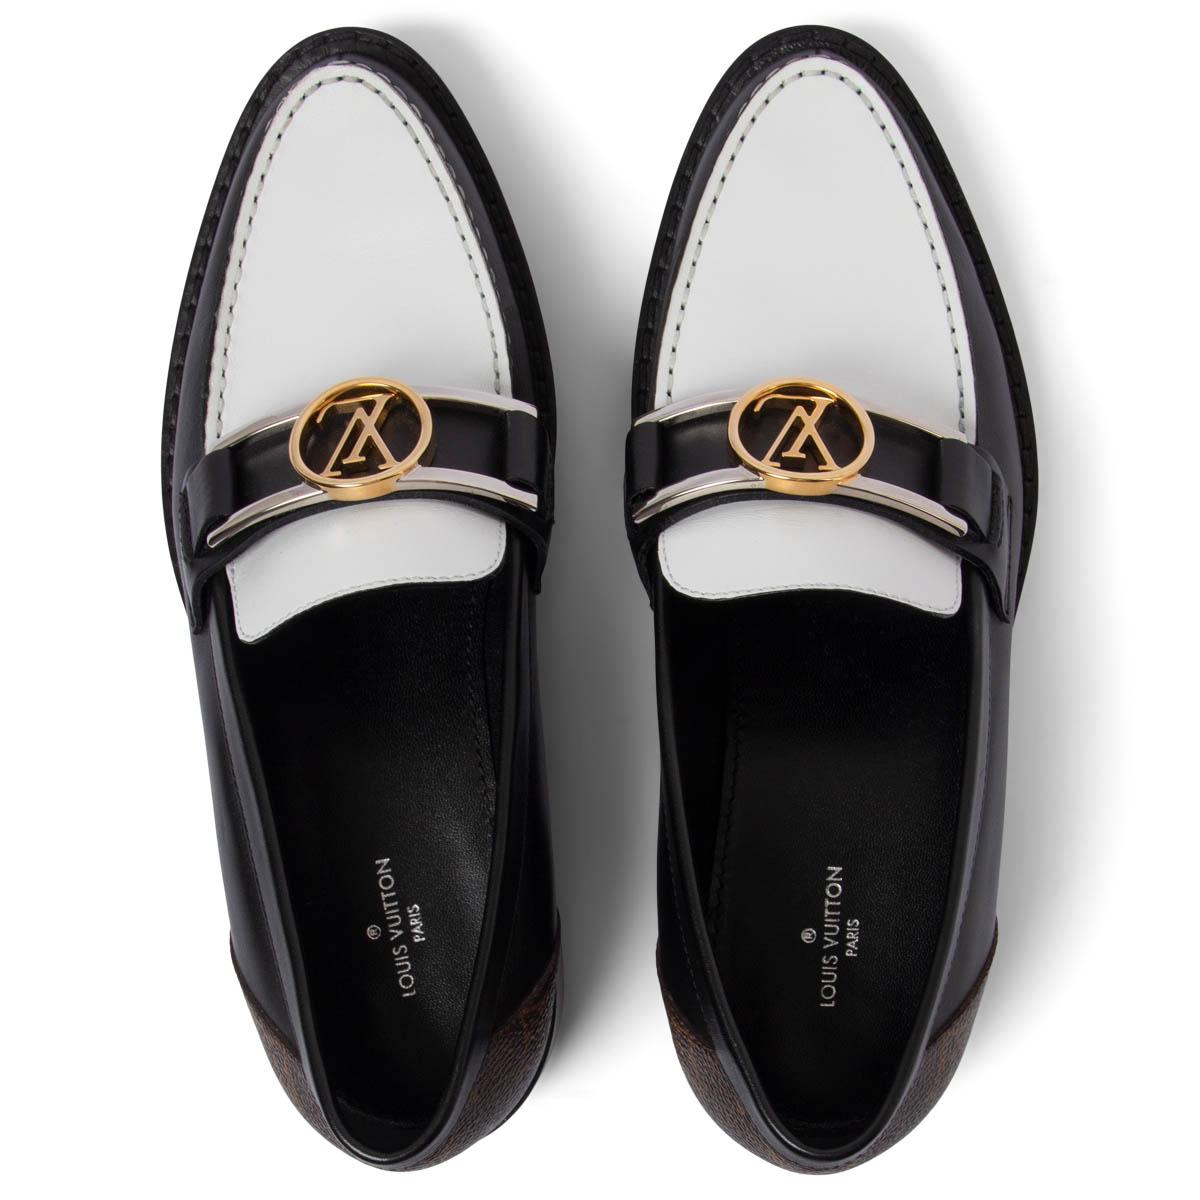 Women's LOUIS VUITTON black & white leather 2020 ACADEMY Loafers Shoes 38.5